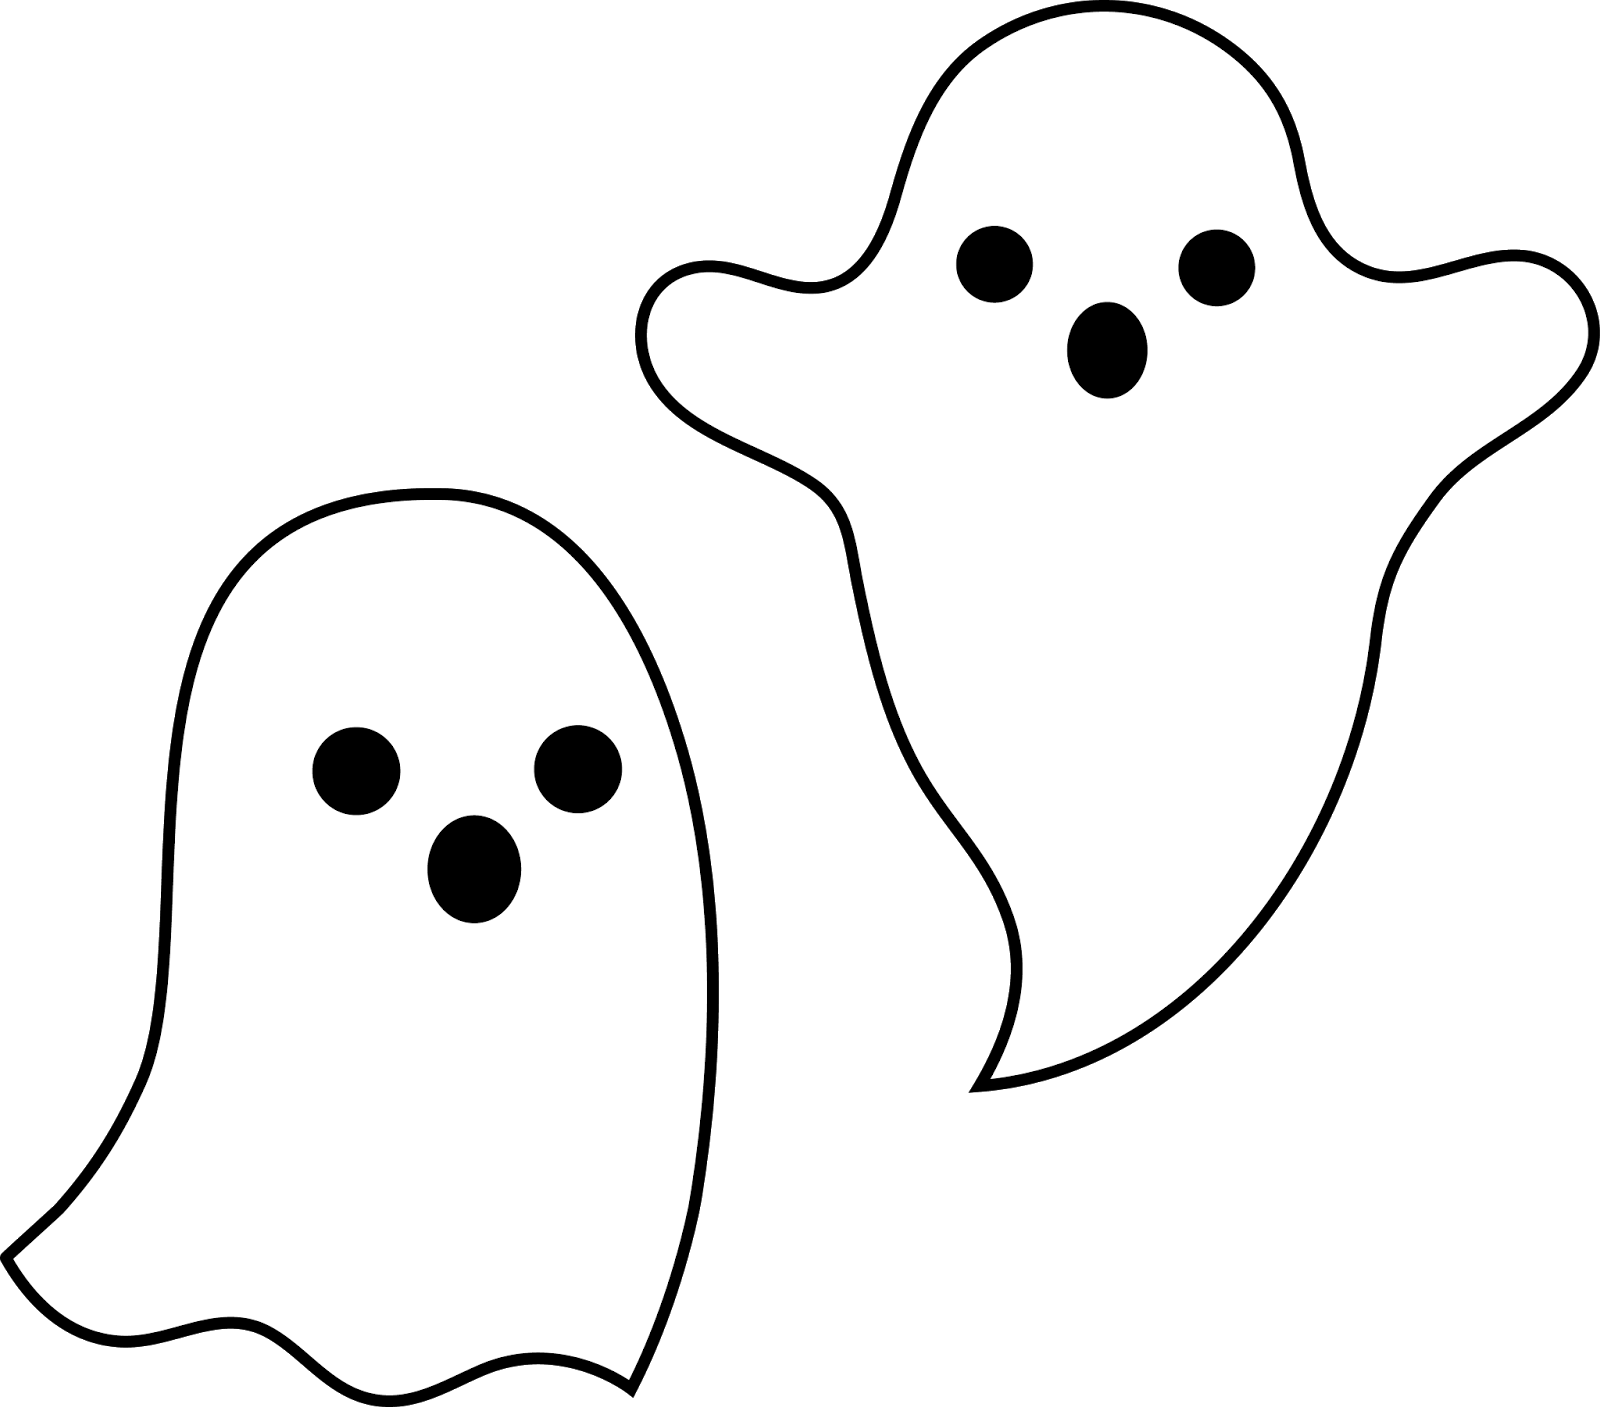 Hand clipart ghost. Silhouette at getdrawings com